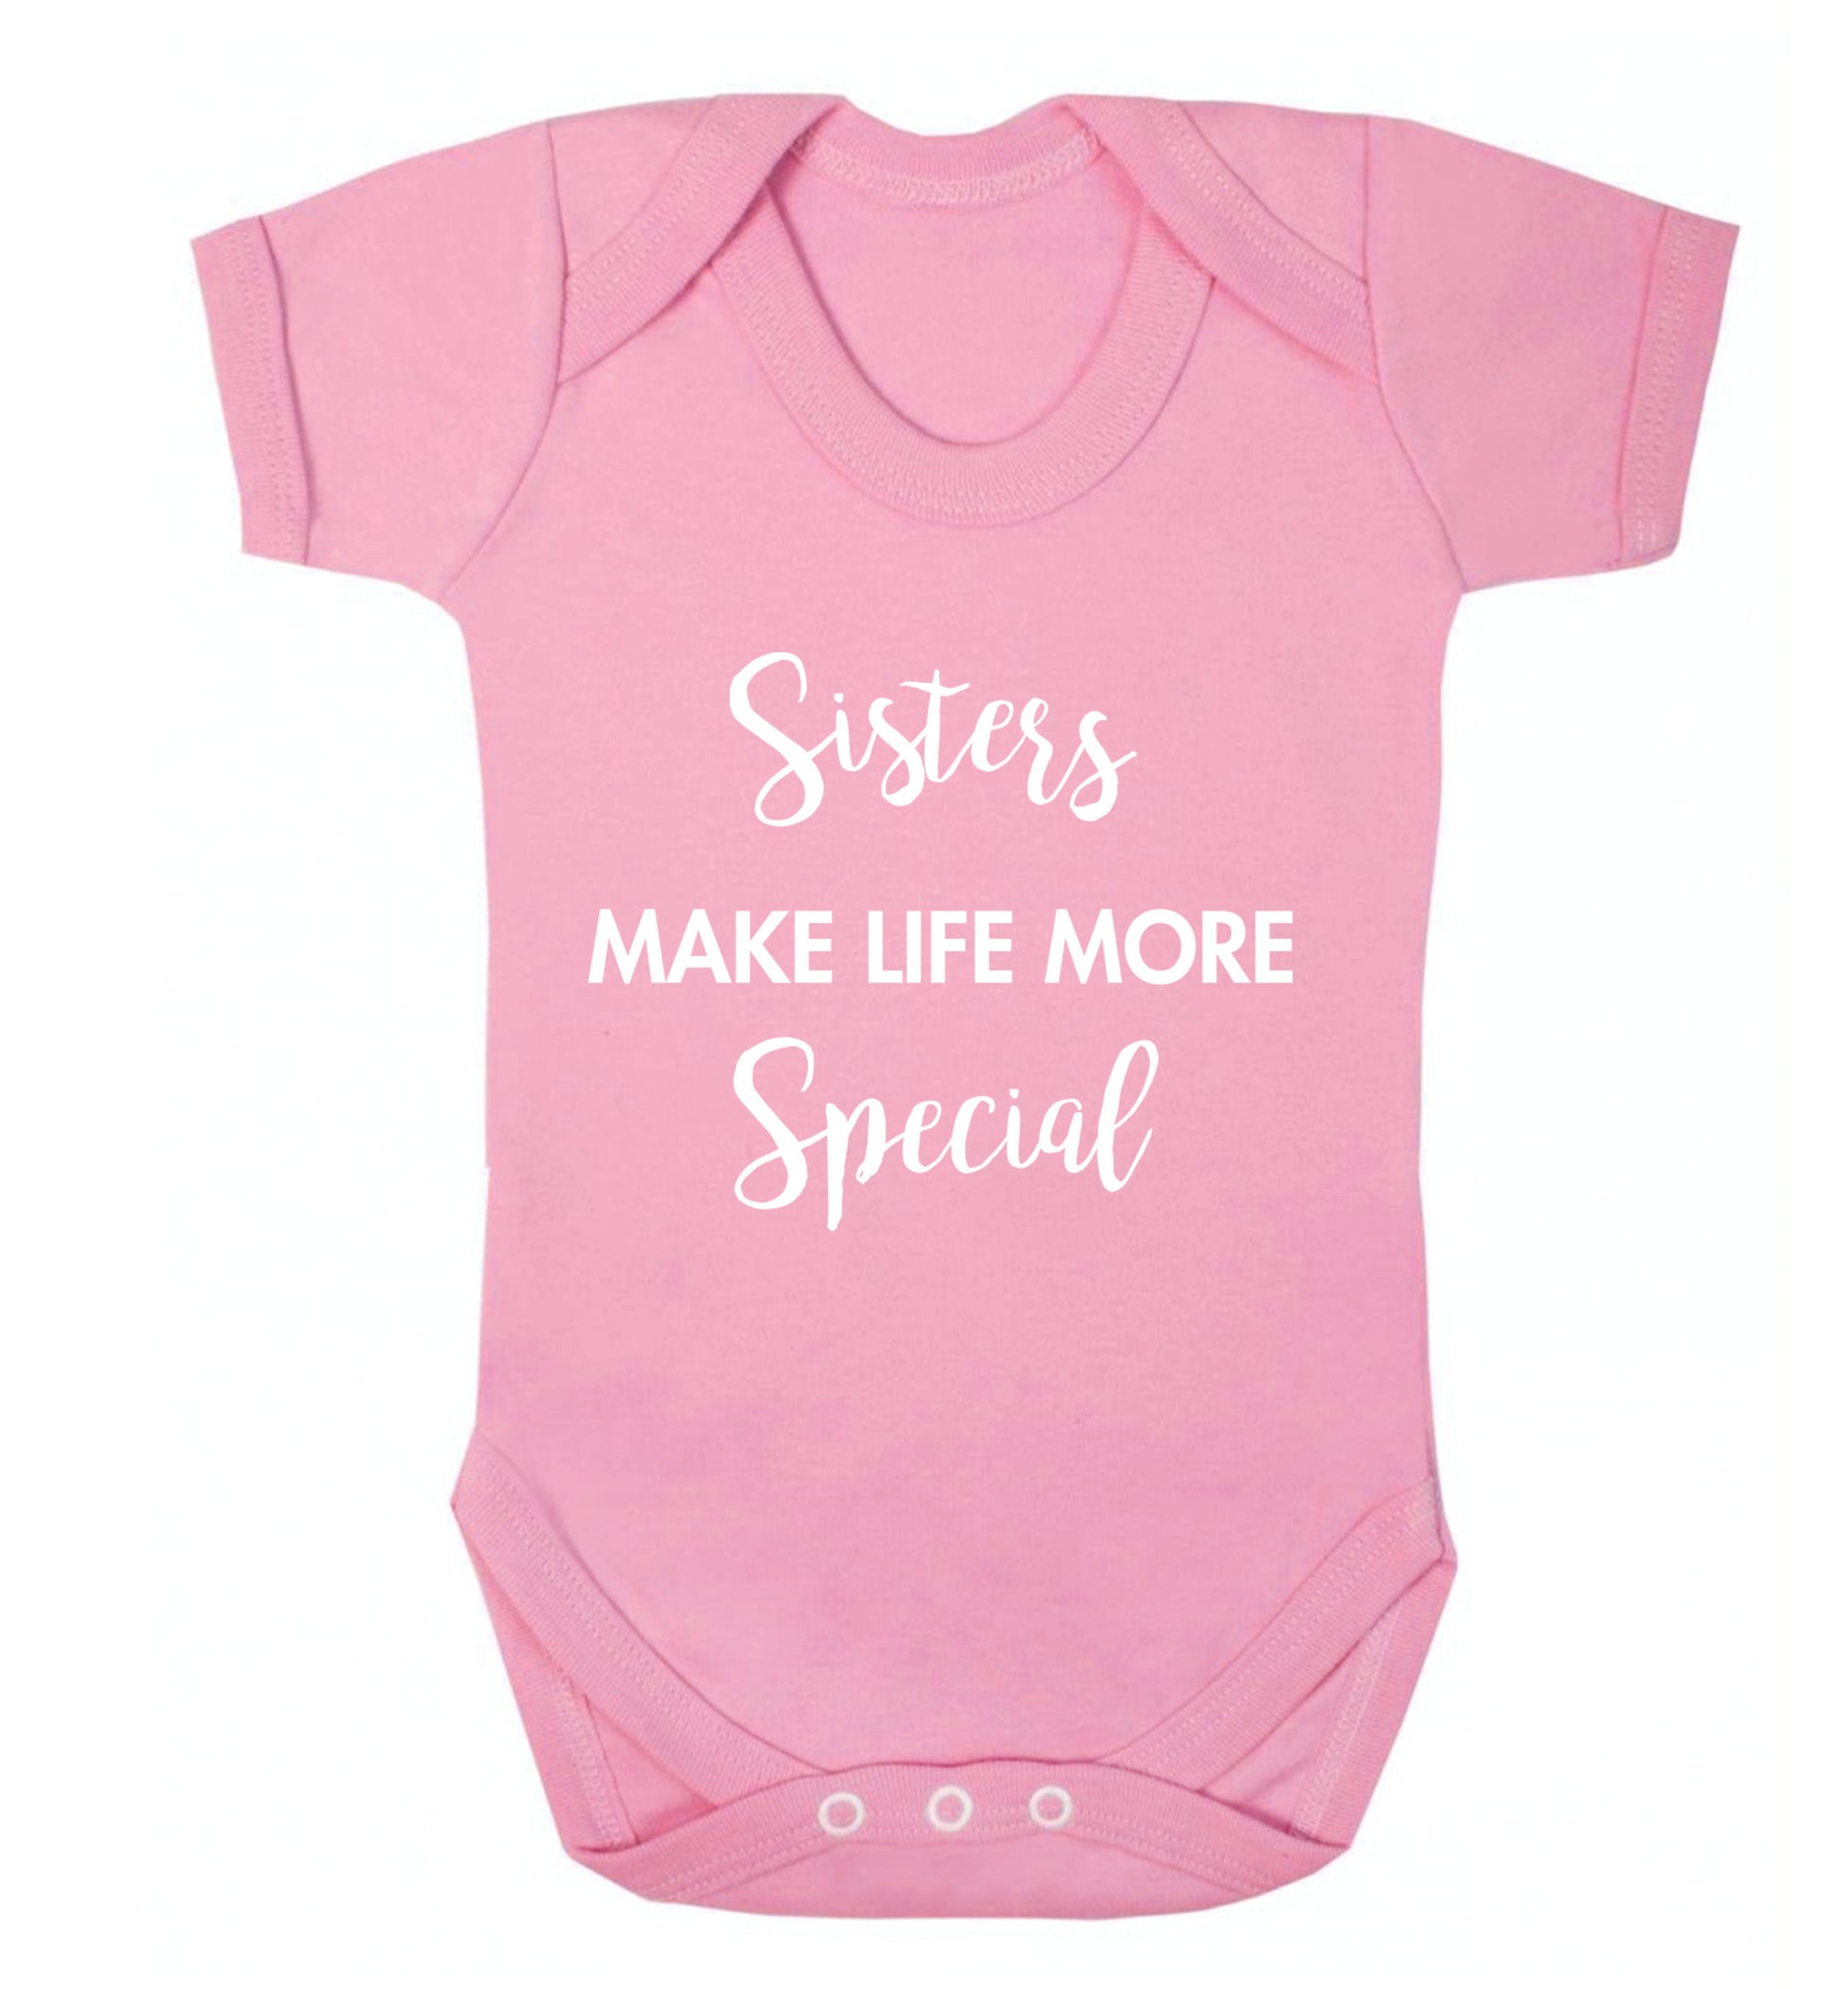 Sisters make life more special Baby Vest pale pink 18-24 months